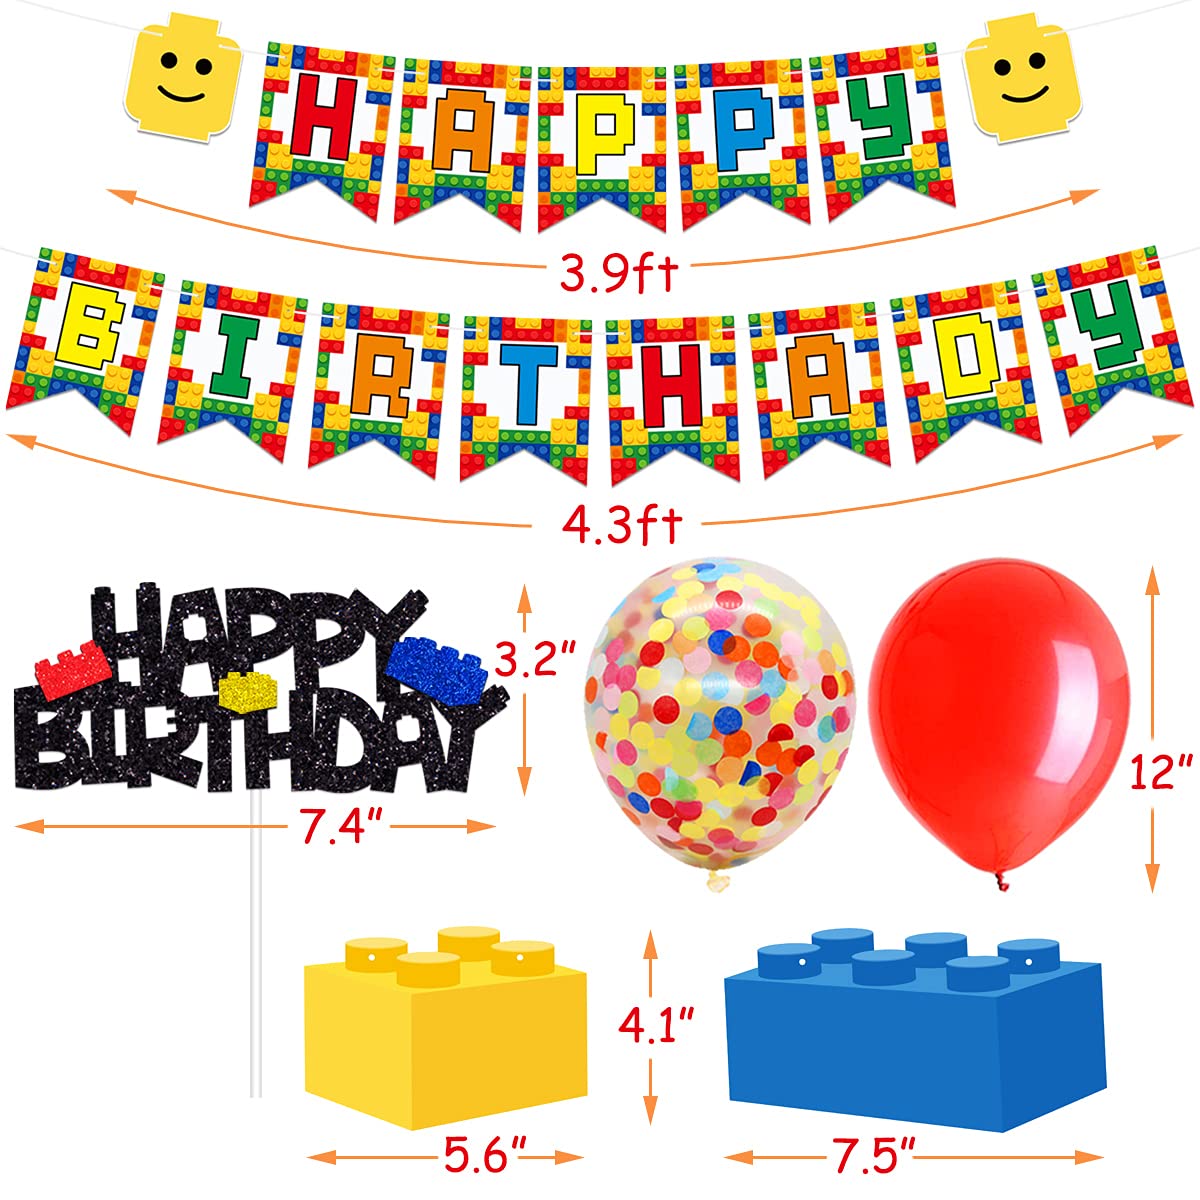 Building Blocks Themed Birthday Party Decorations Pack - Includes Glitter Cake Topper Banners and Balloons - Summer Colorful Themed Bday Party Pack Supplies